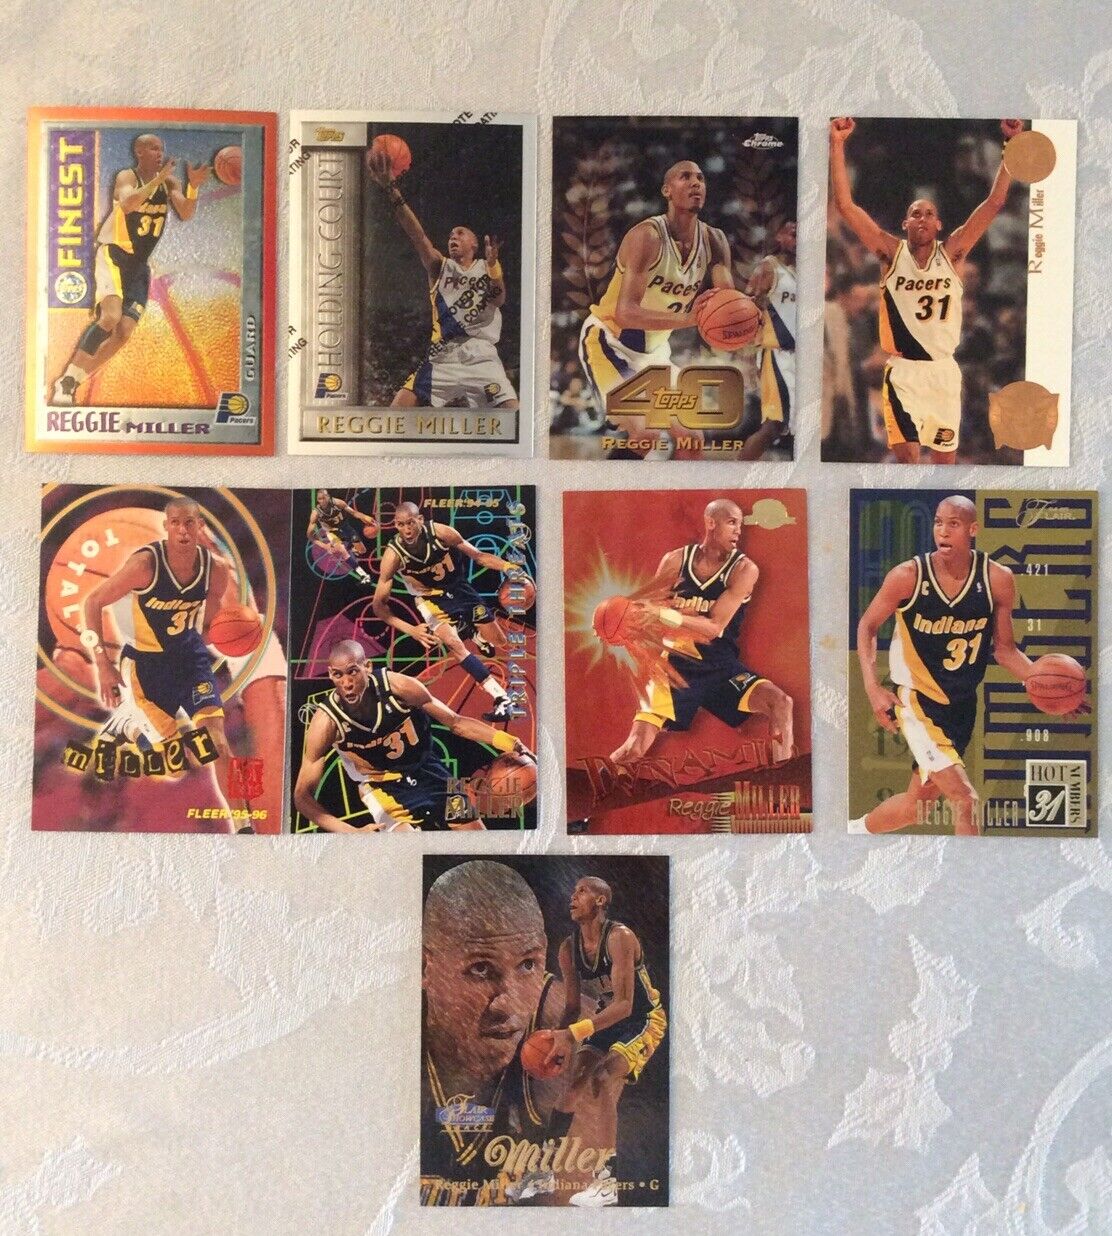 REGGIE MILLER INSERT CARD LOT (9) ALL DIFFERENT NM ALSO 2 FREE FINEST CARDS 